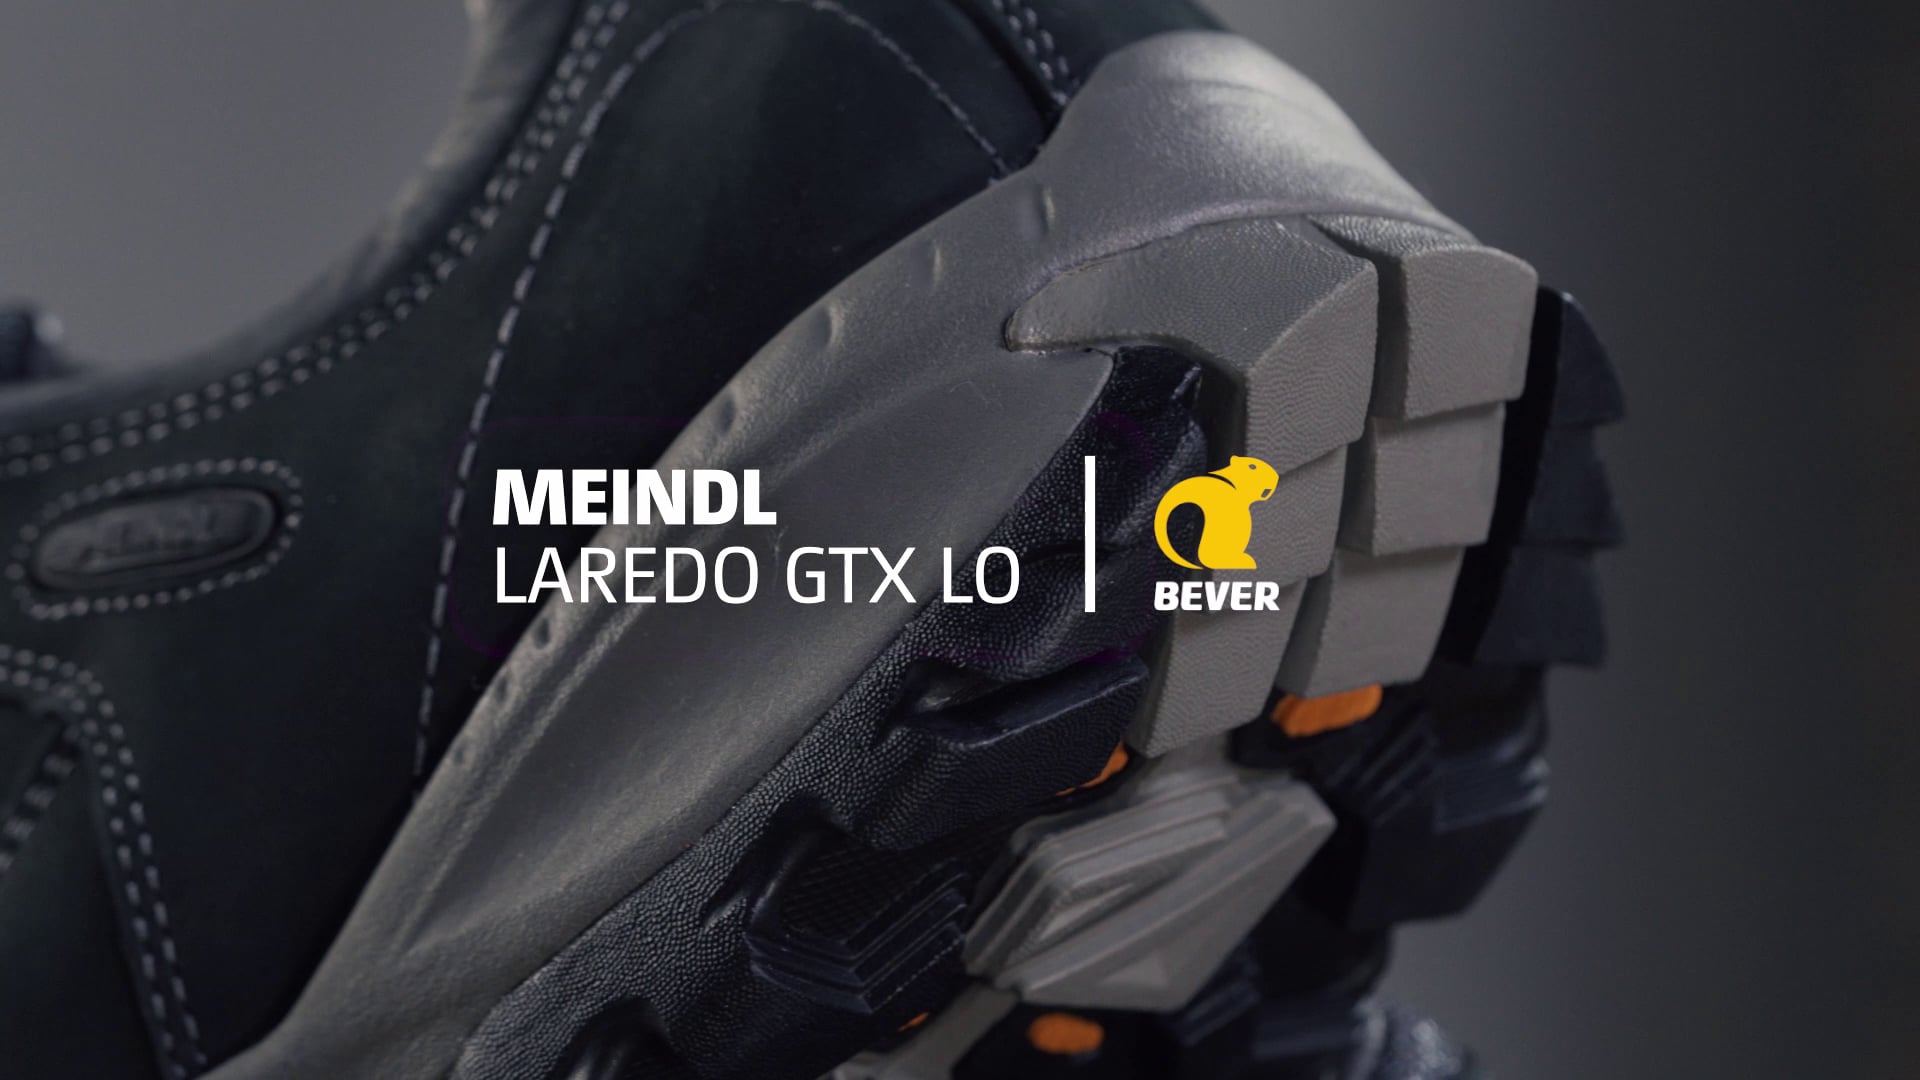 Meindl GTX Review | Bever on Vimeo